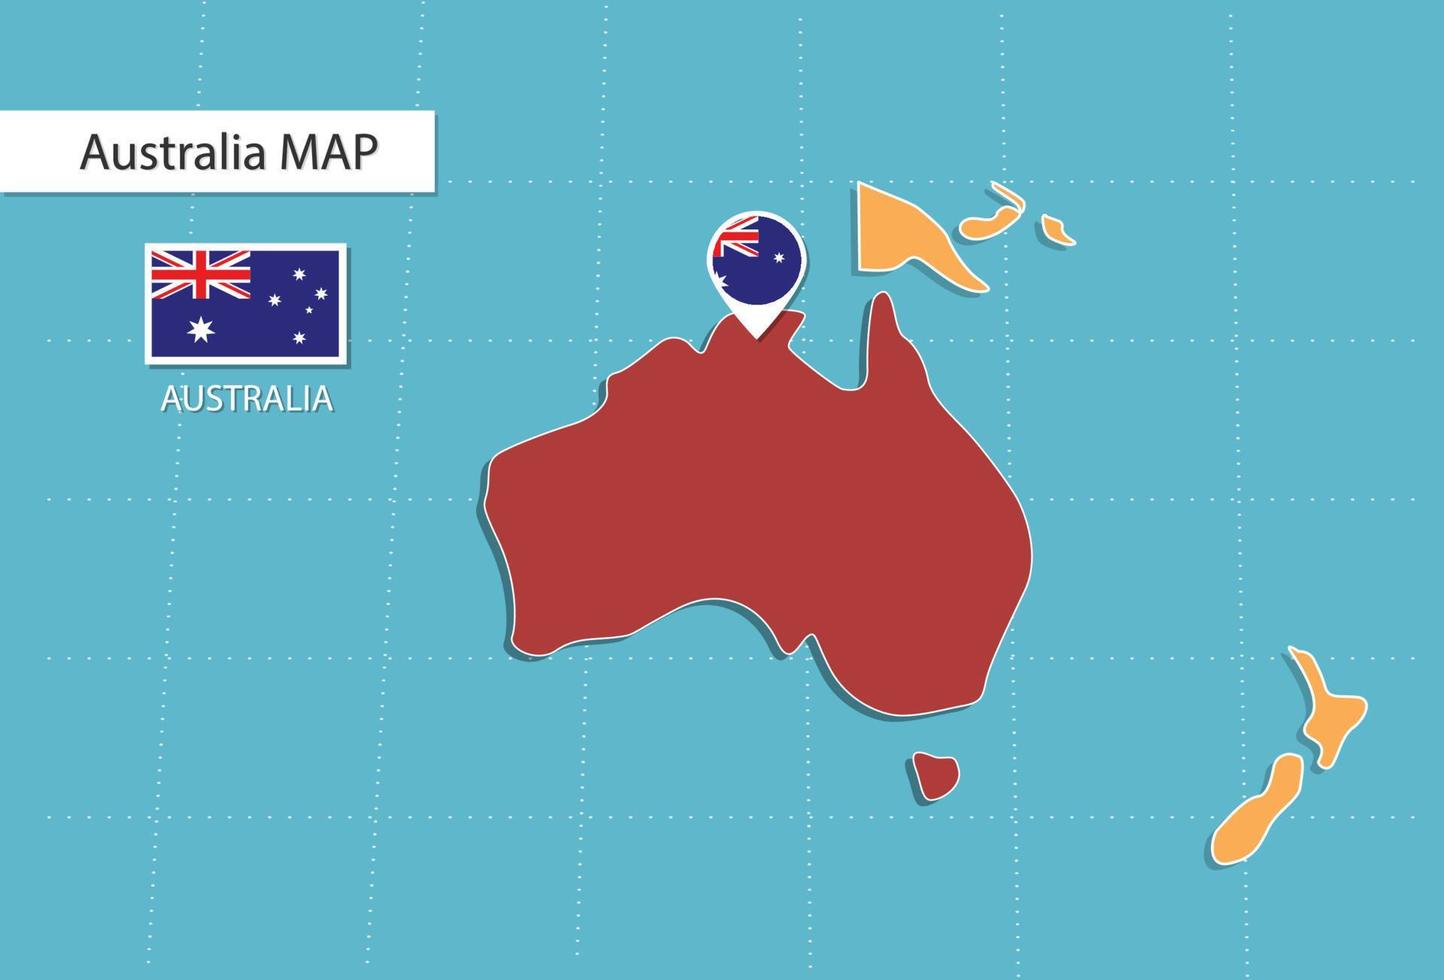 Australia map in Australia, icons showing Australia location and flags. vector